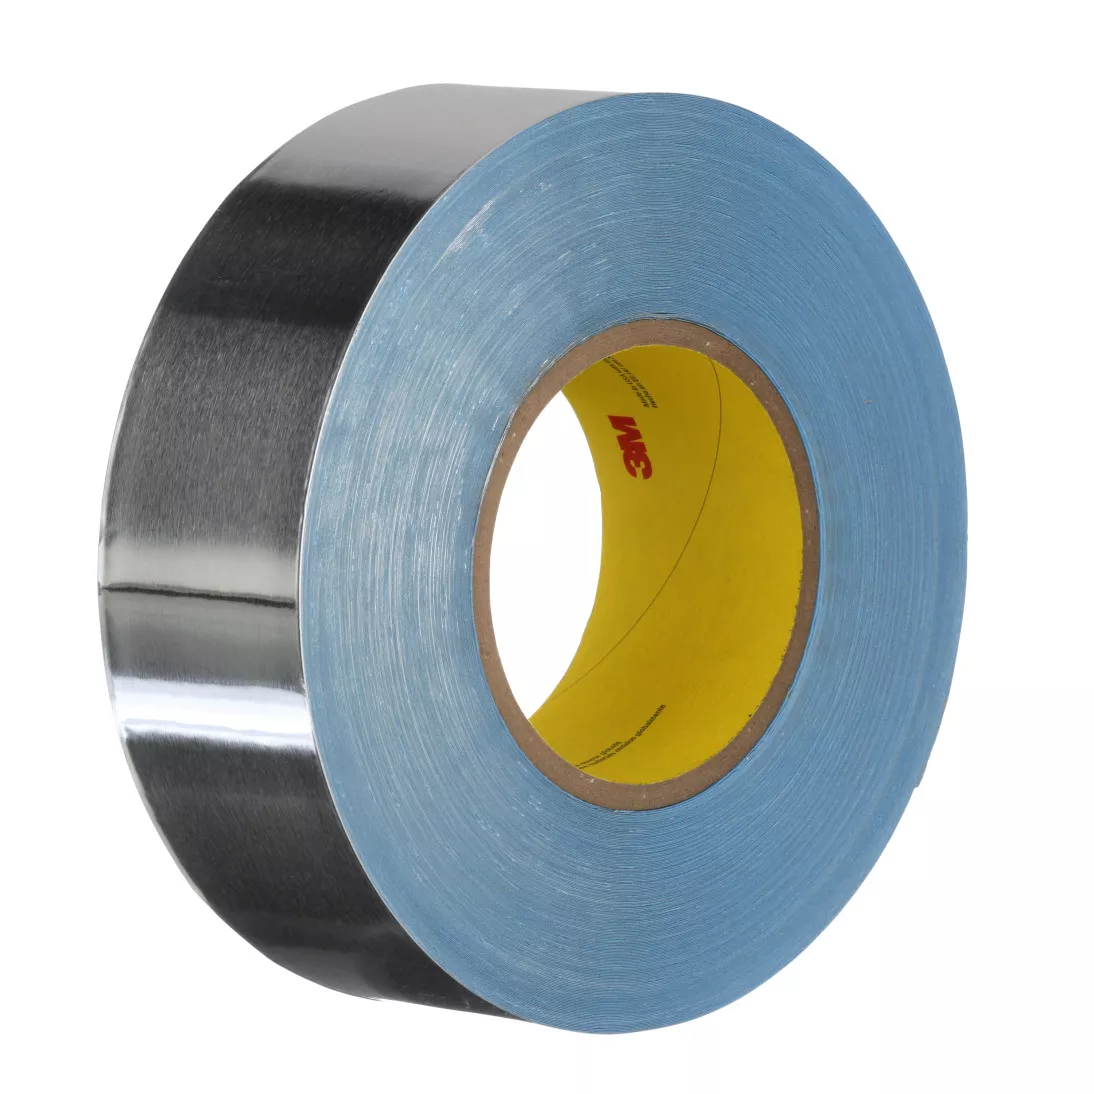 3M™ Vibration Damping Tape 434, Silver, 20 in x 60 yd, 7.5 mil, 1 roll
per case